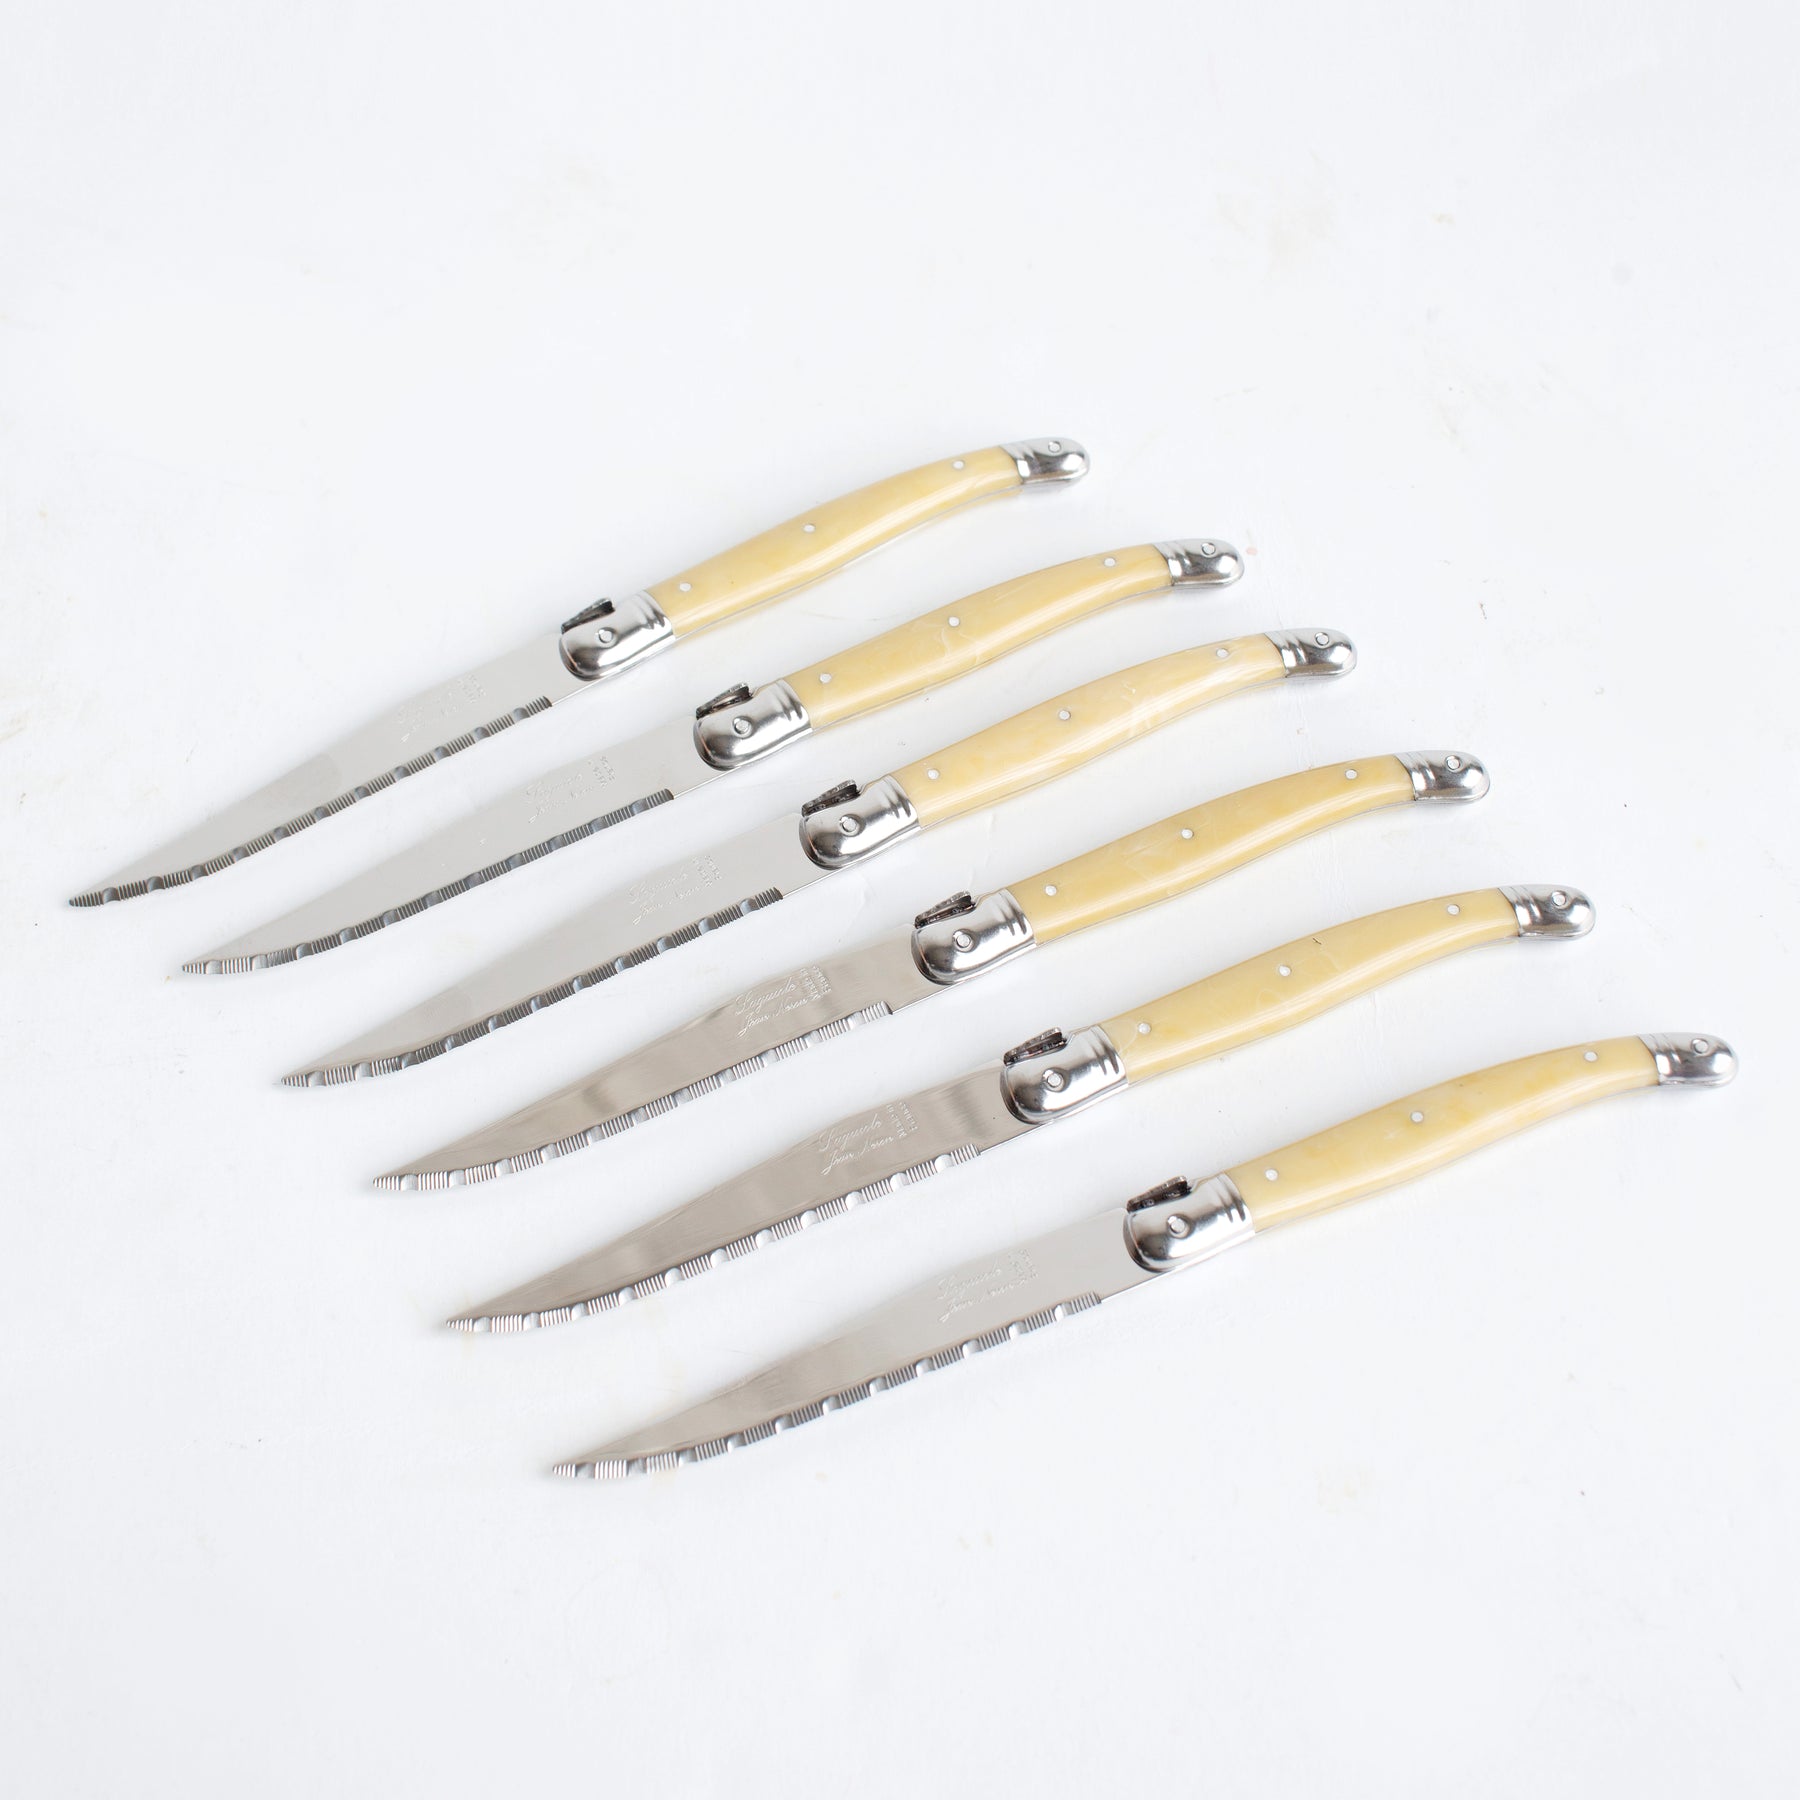 French Home Set of 4 Laguiole Steak Knives, Pearlized White